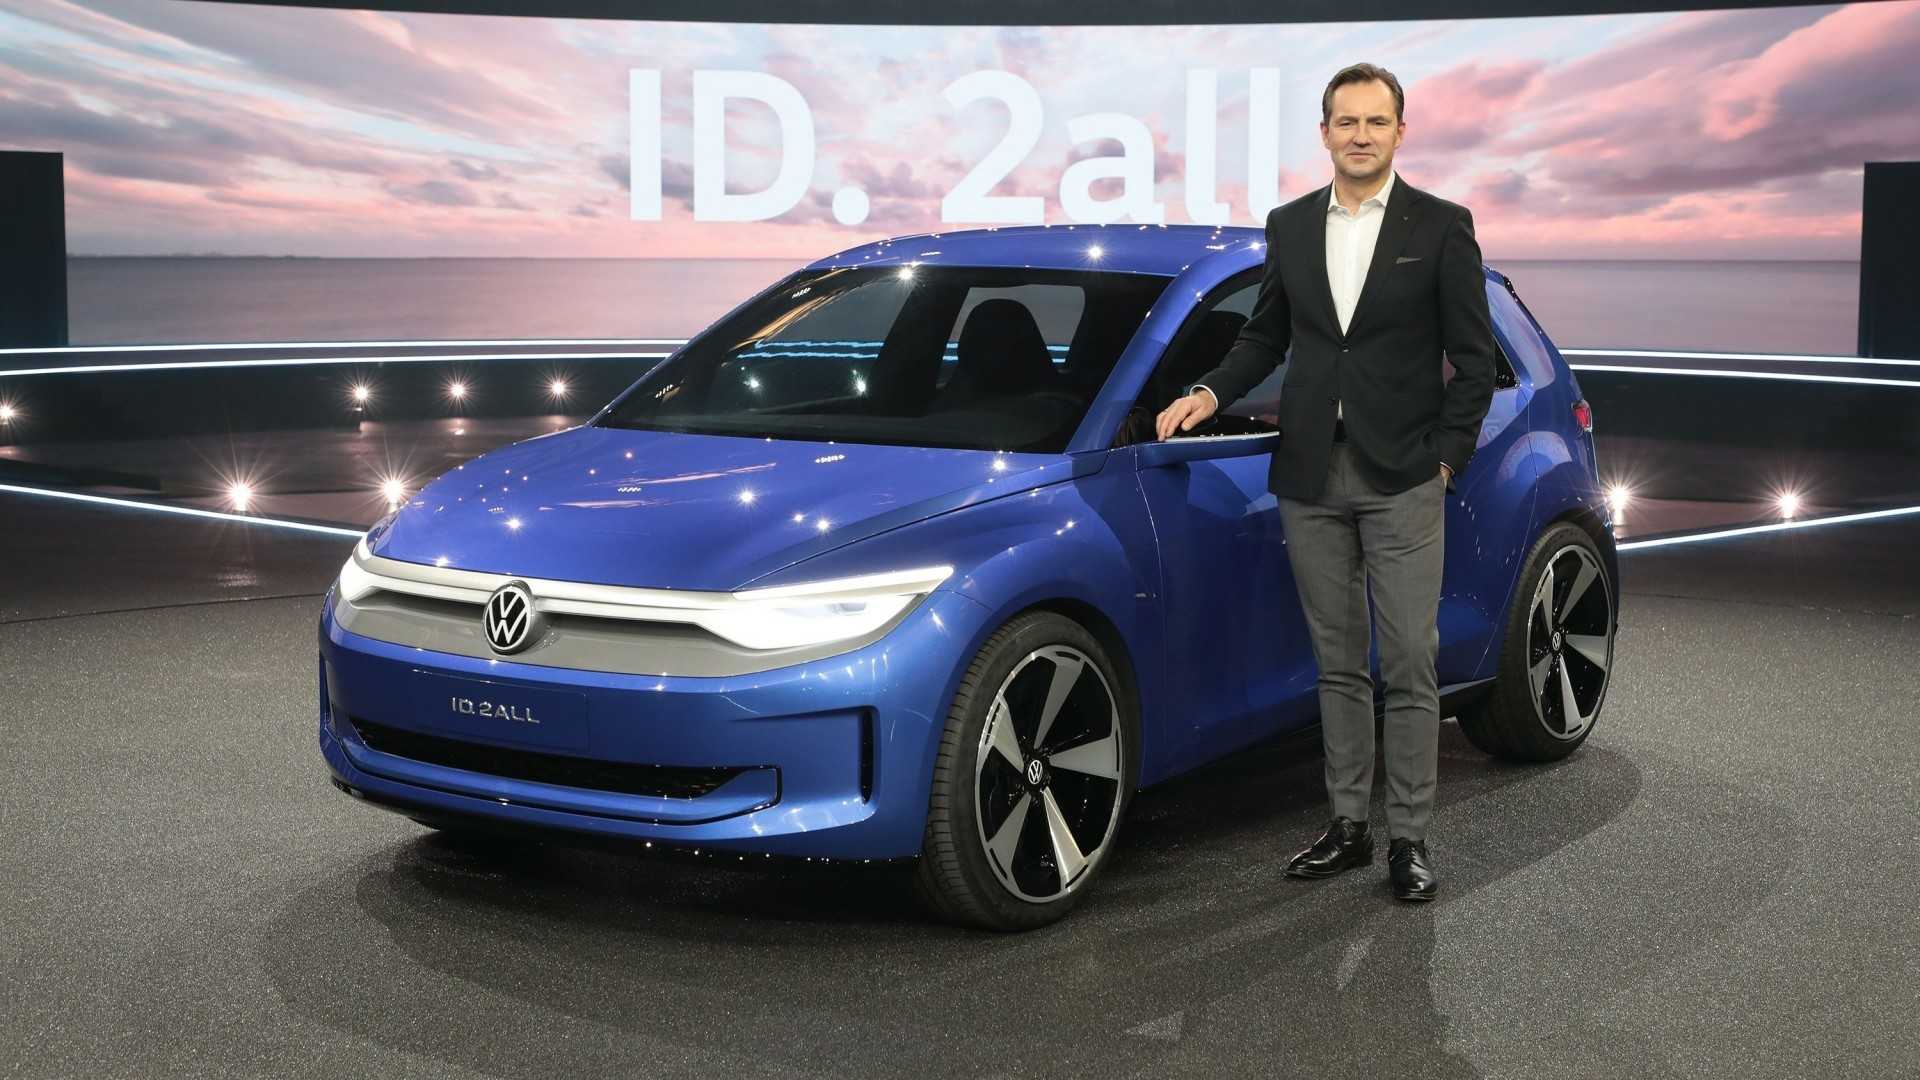 Volkswagen brand CEO Thomas Schaefer with the Volkswagen ID. 2all Concept